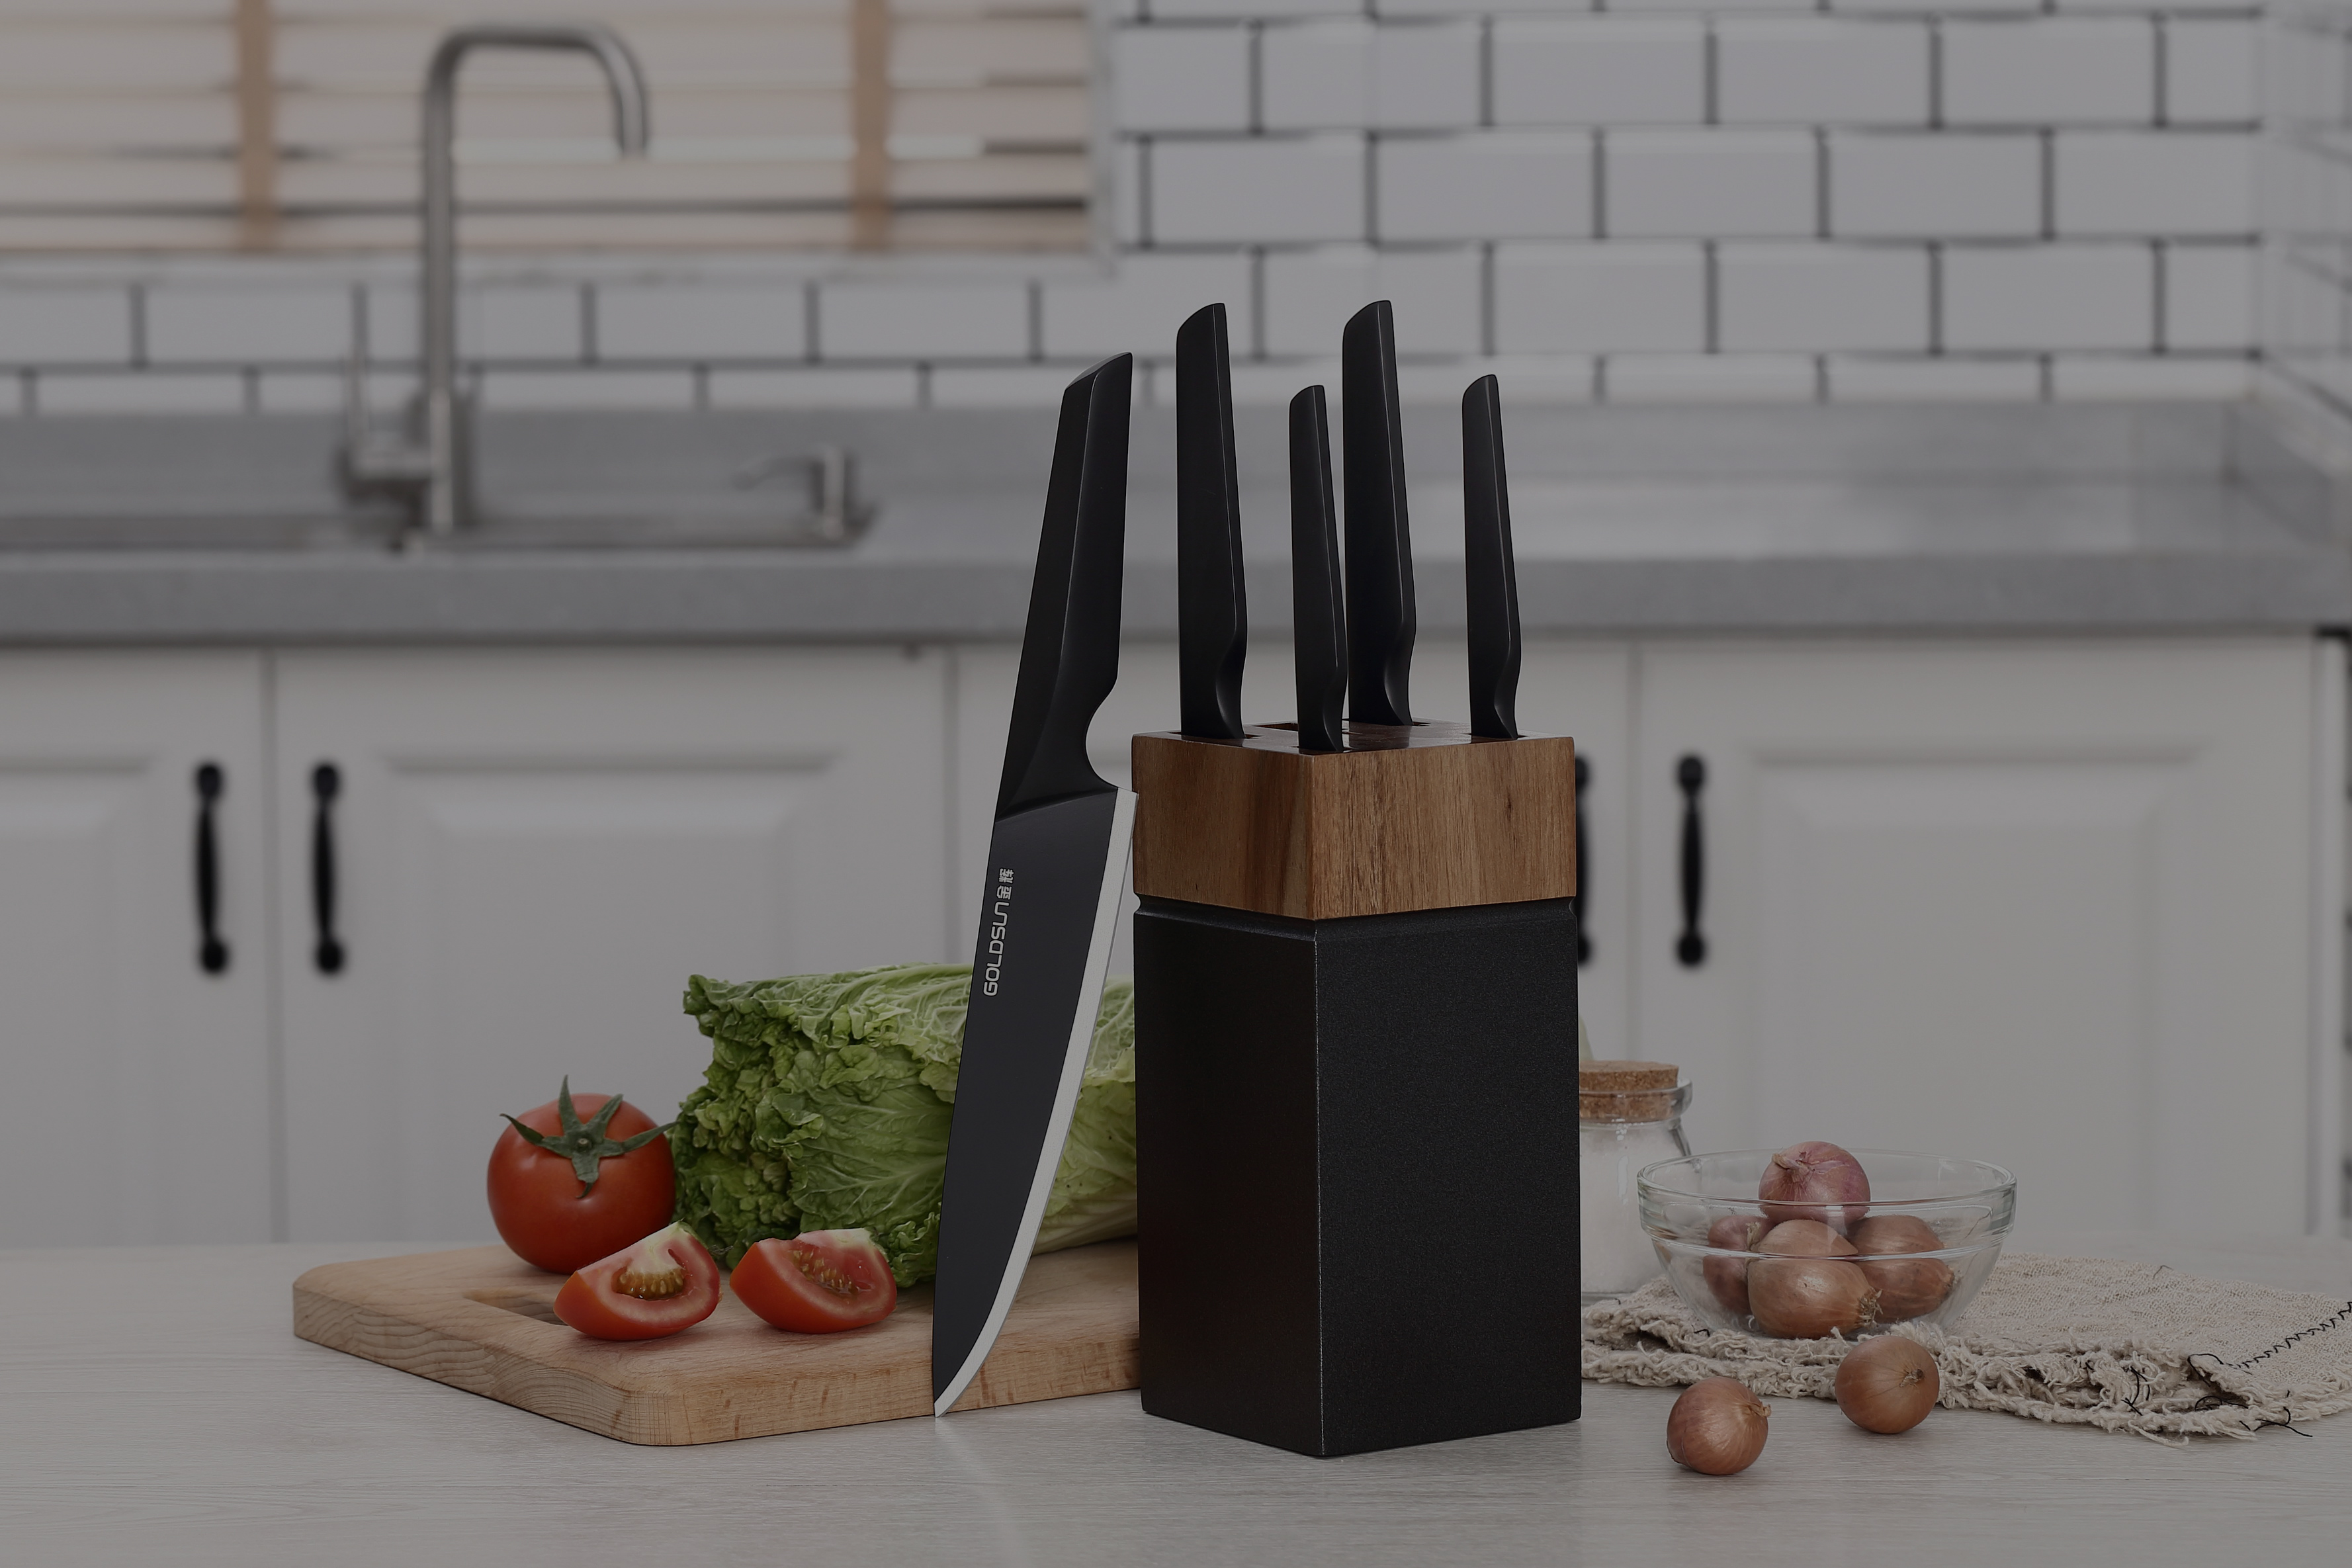 Black Stainless steel knife set with block